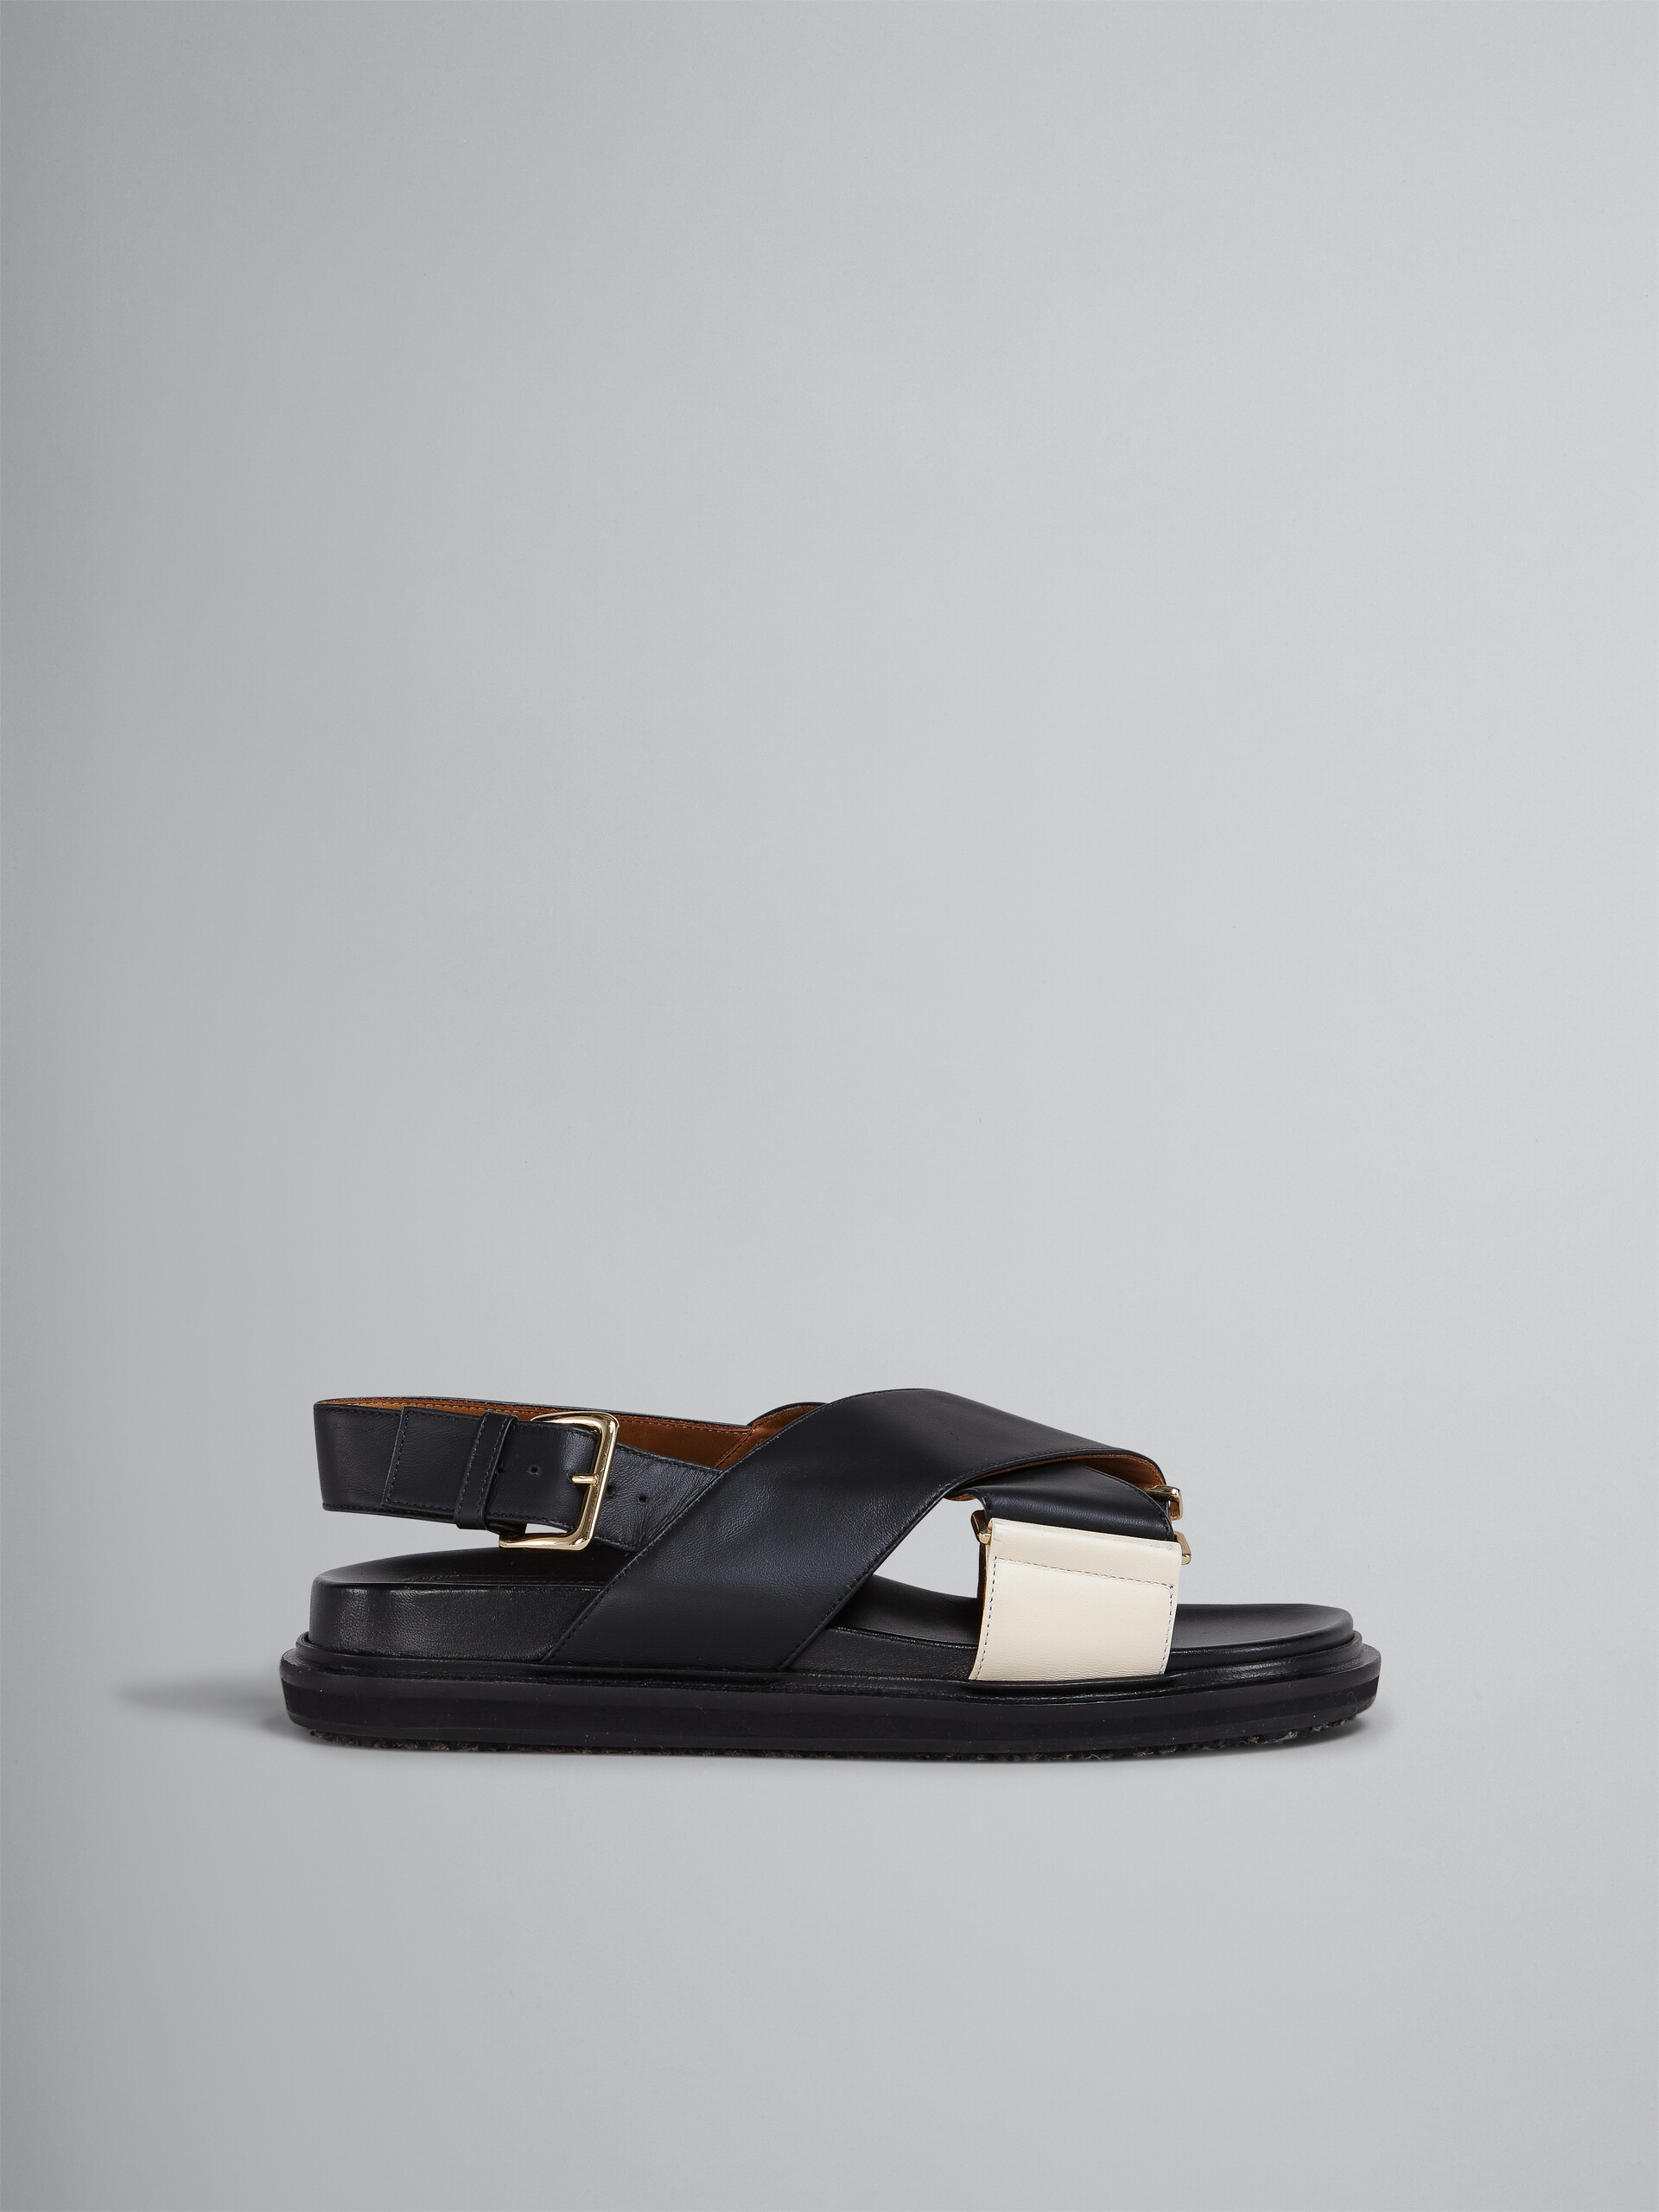 Black and white leather Fussbett - Sandals - Image 1